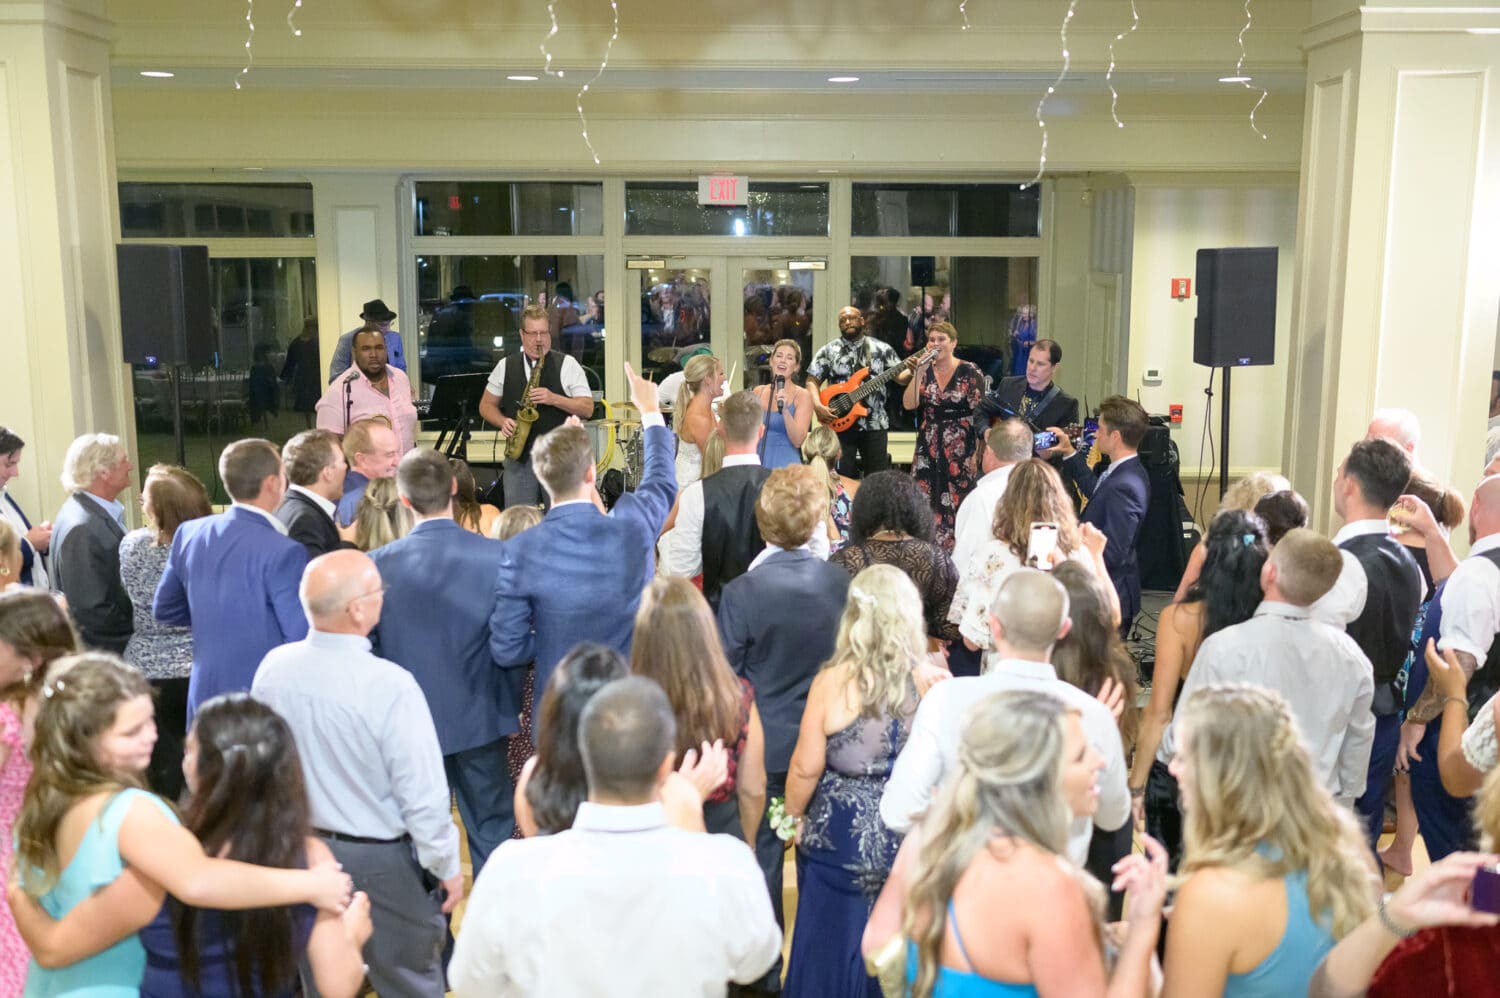 Fun for the last dance - Dunes Golf and Beach Club